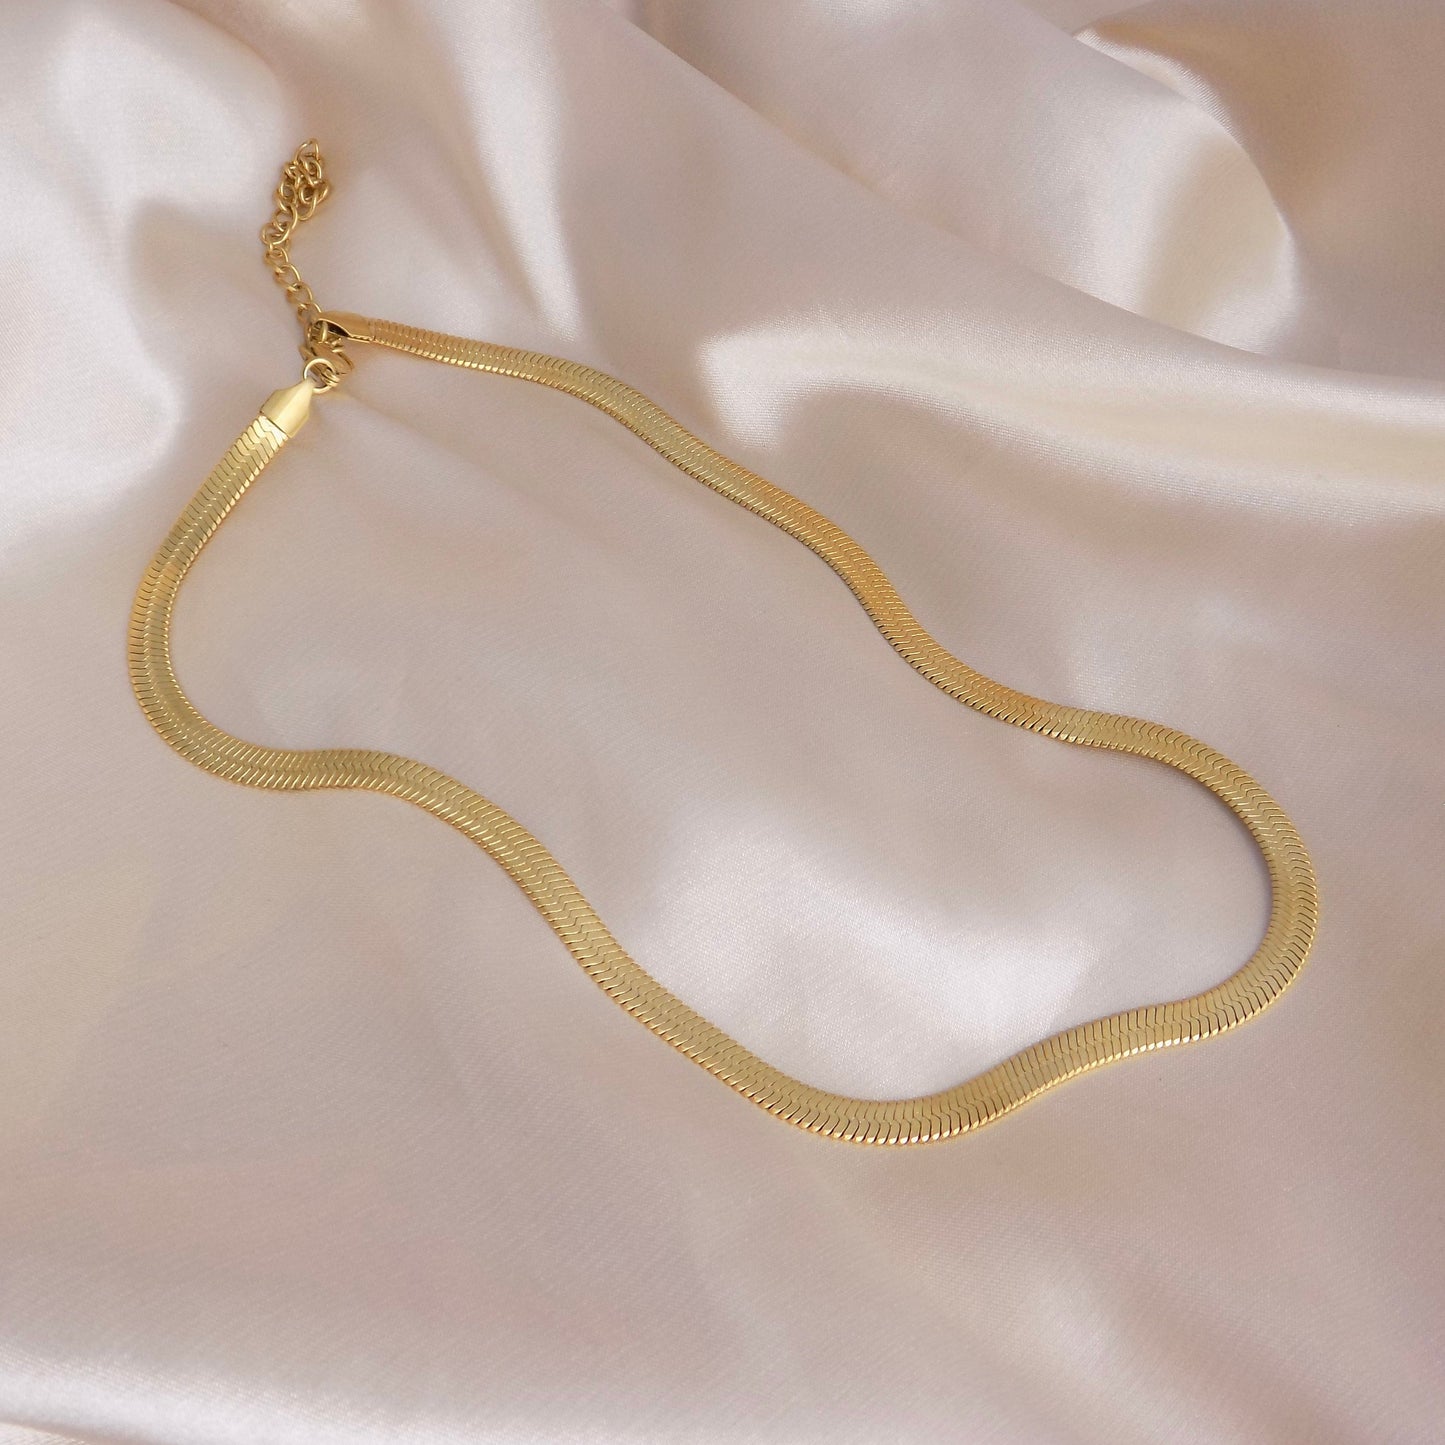 Valentines Day Gift, 18K Gold Snake Chain Necklace, Herringbone Necklace Stainless Steel 5mm, Trendy Gold Layer, M6-712